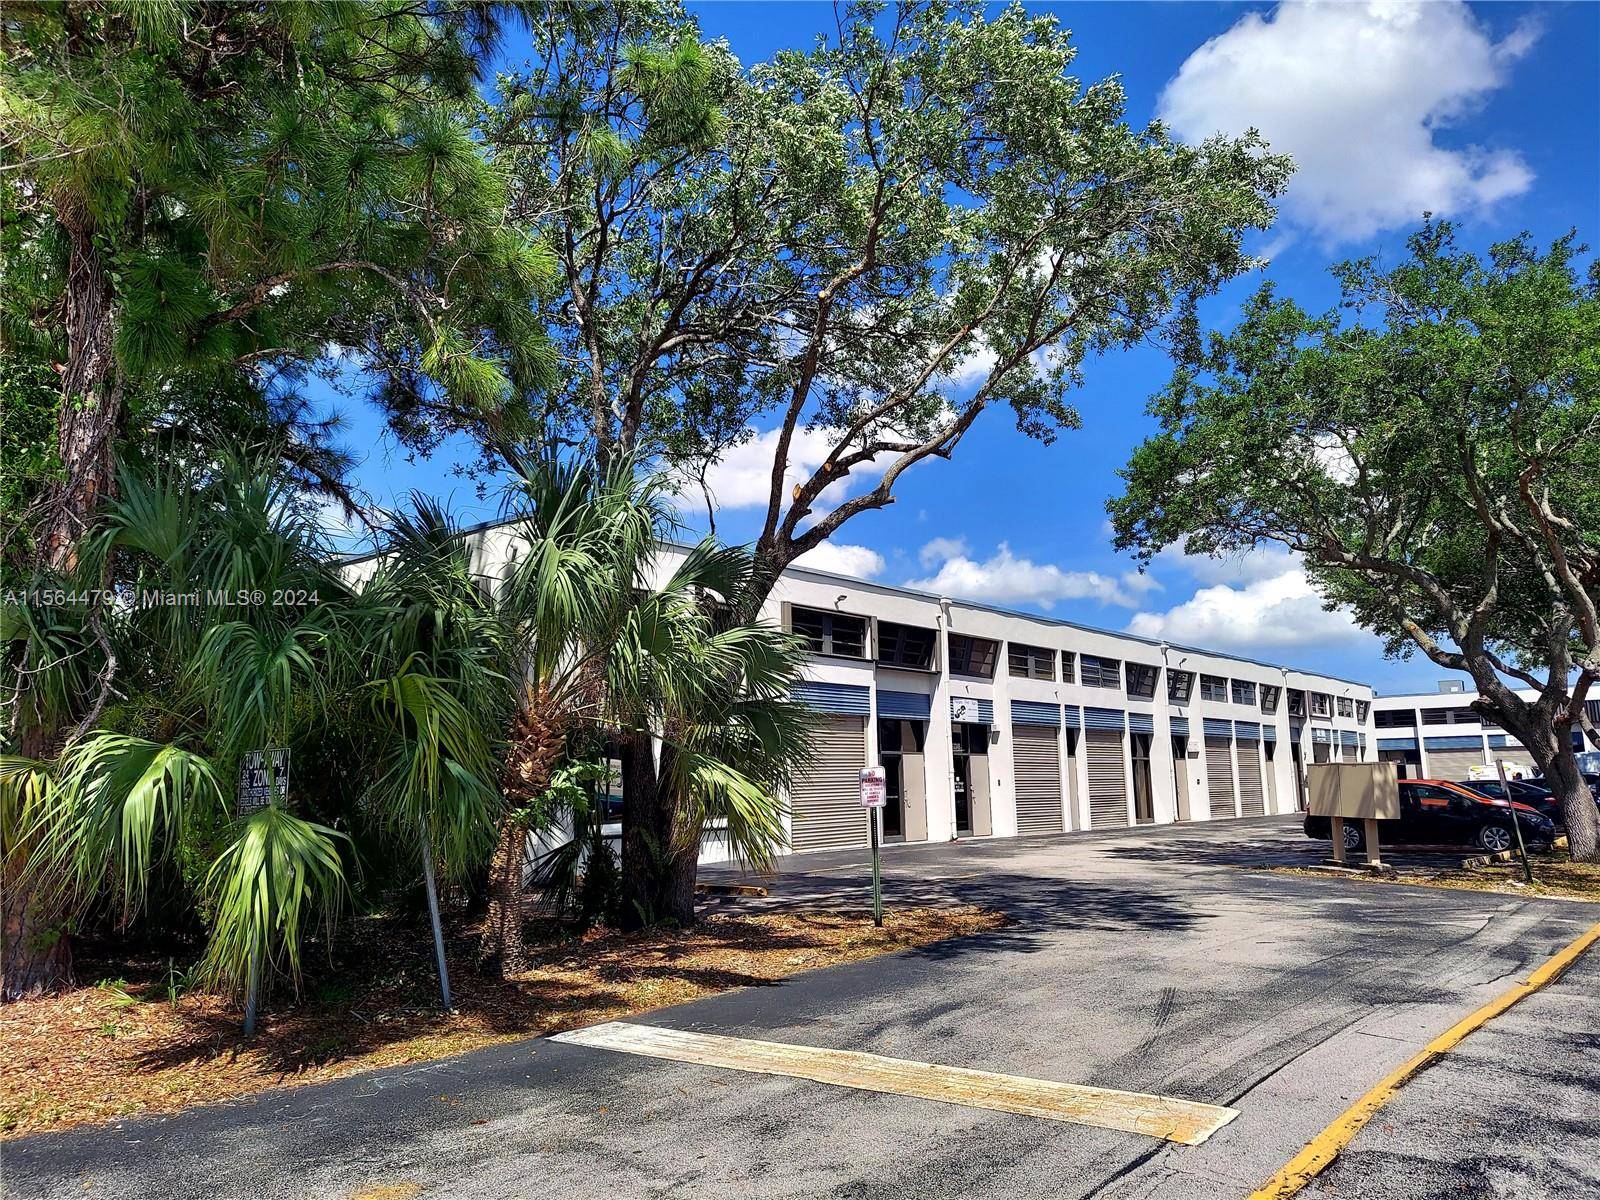 Office Warehouse Condo for sale in the Kendall Park Commercial subdivision, situated in Kendall, near the Miami Executive Airport.